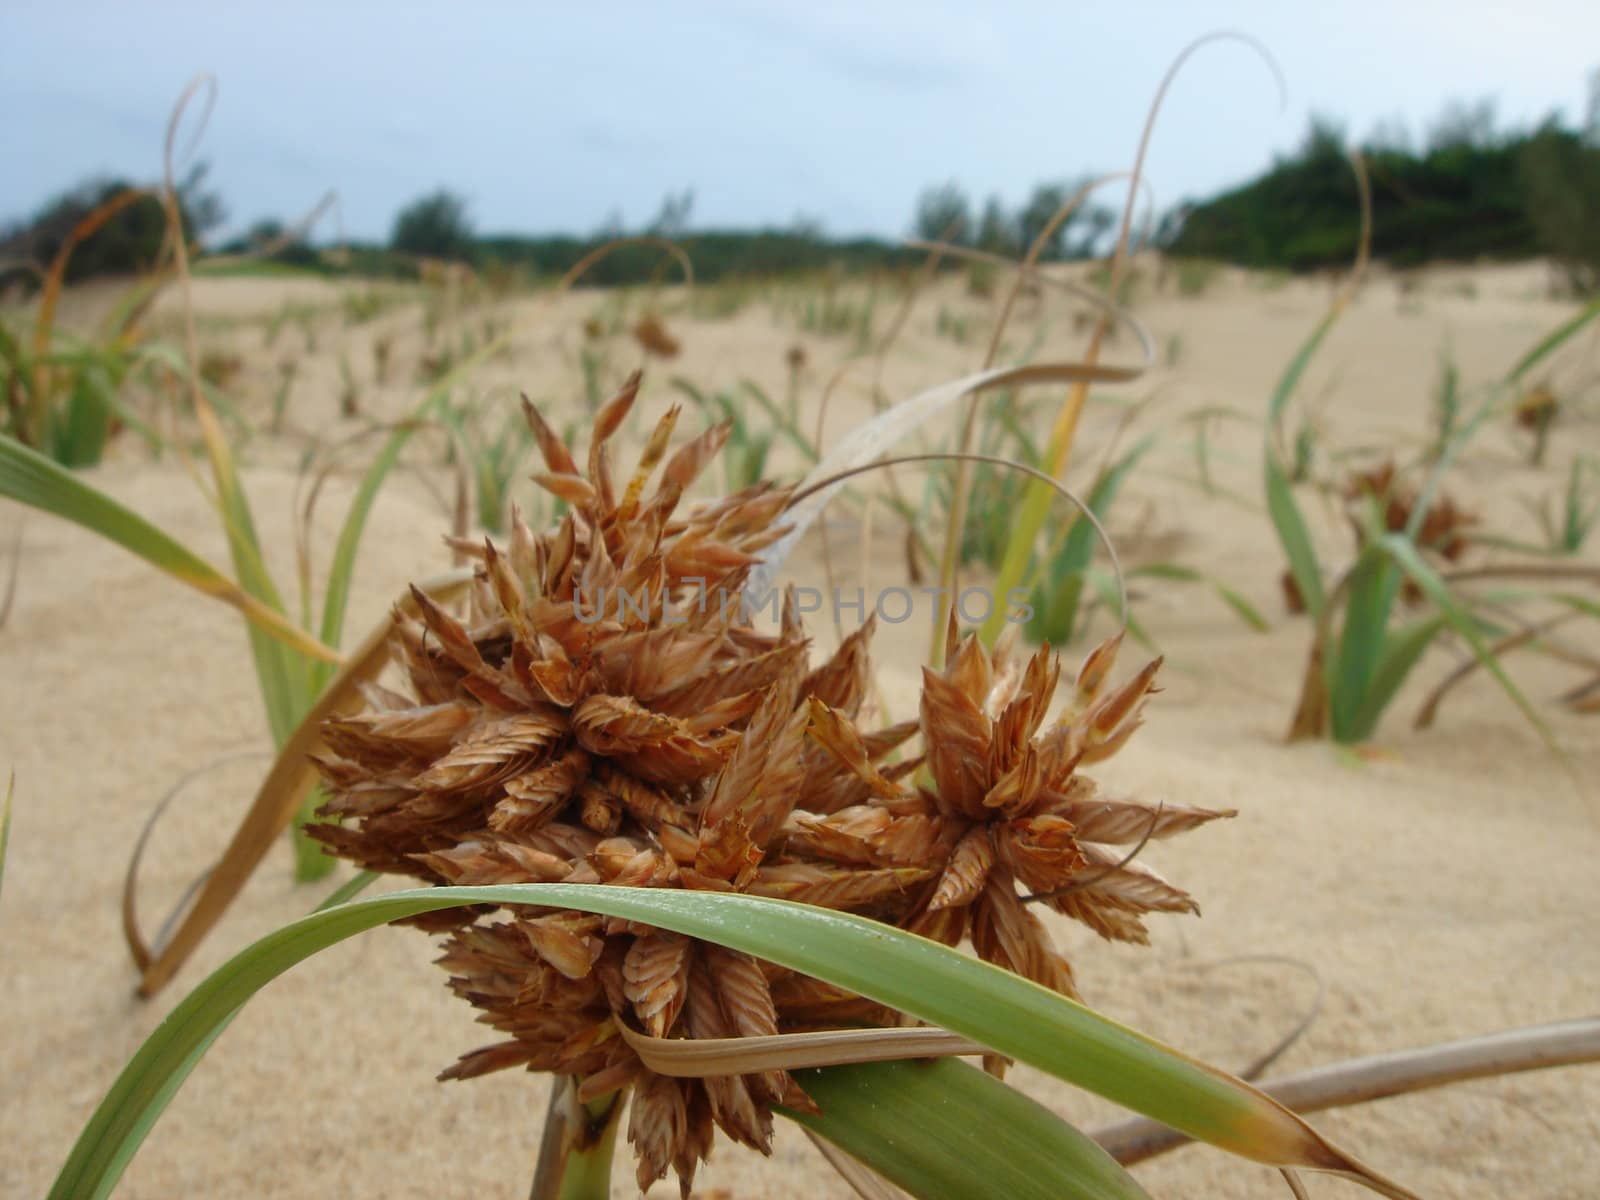 photo of a sand tropical plant on  beach or dune in Africa